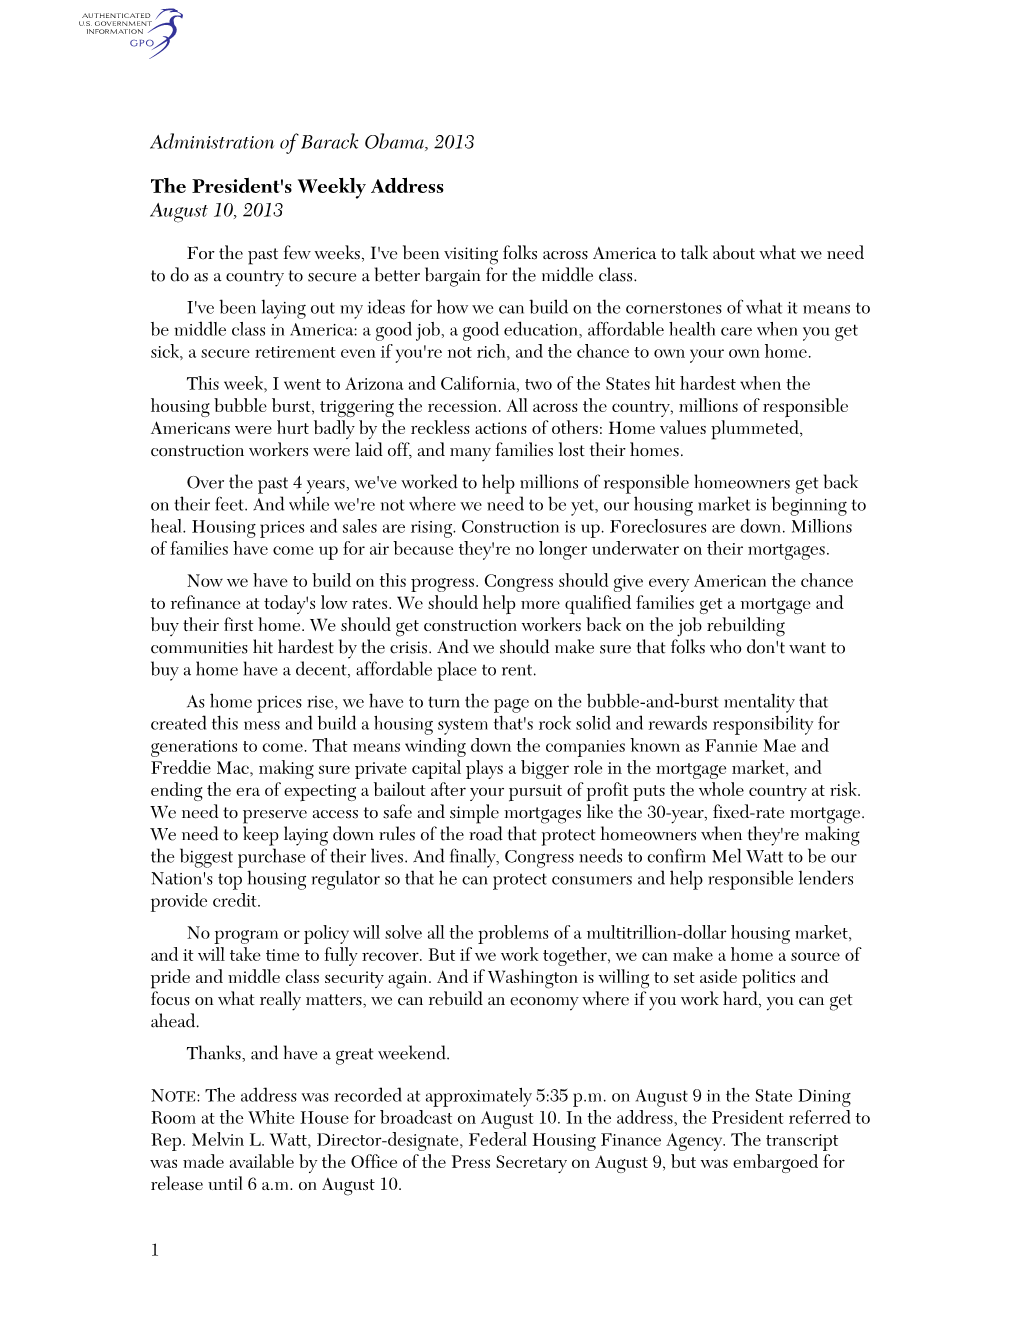 Administration of Barack Obama, 2013 the President's Weekly Address August 10, 2013